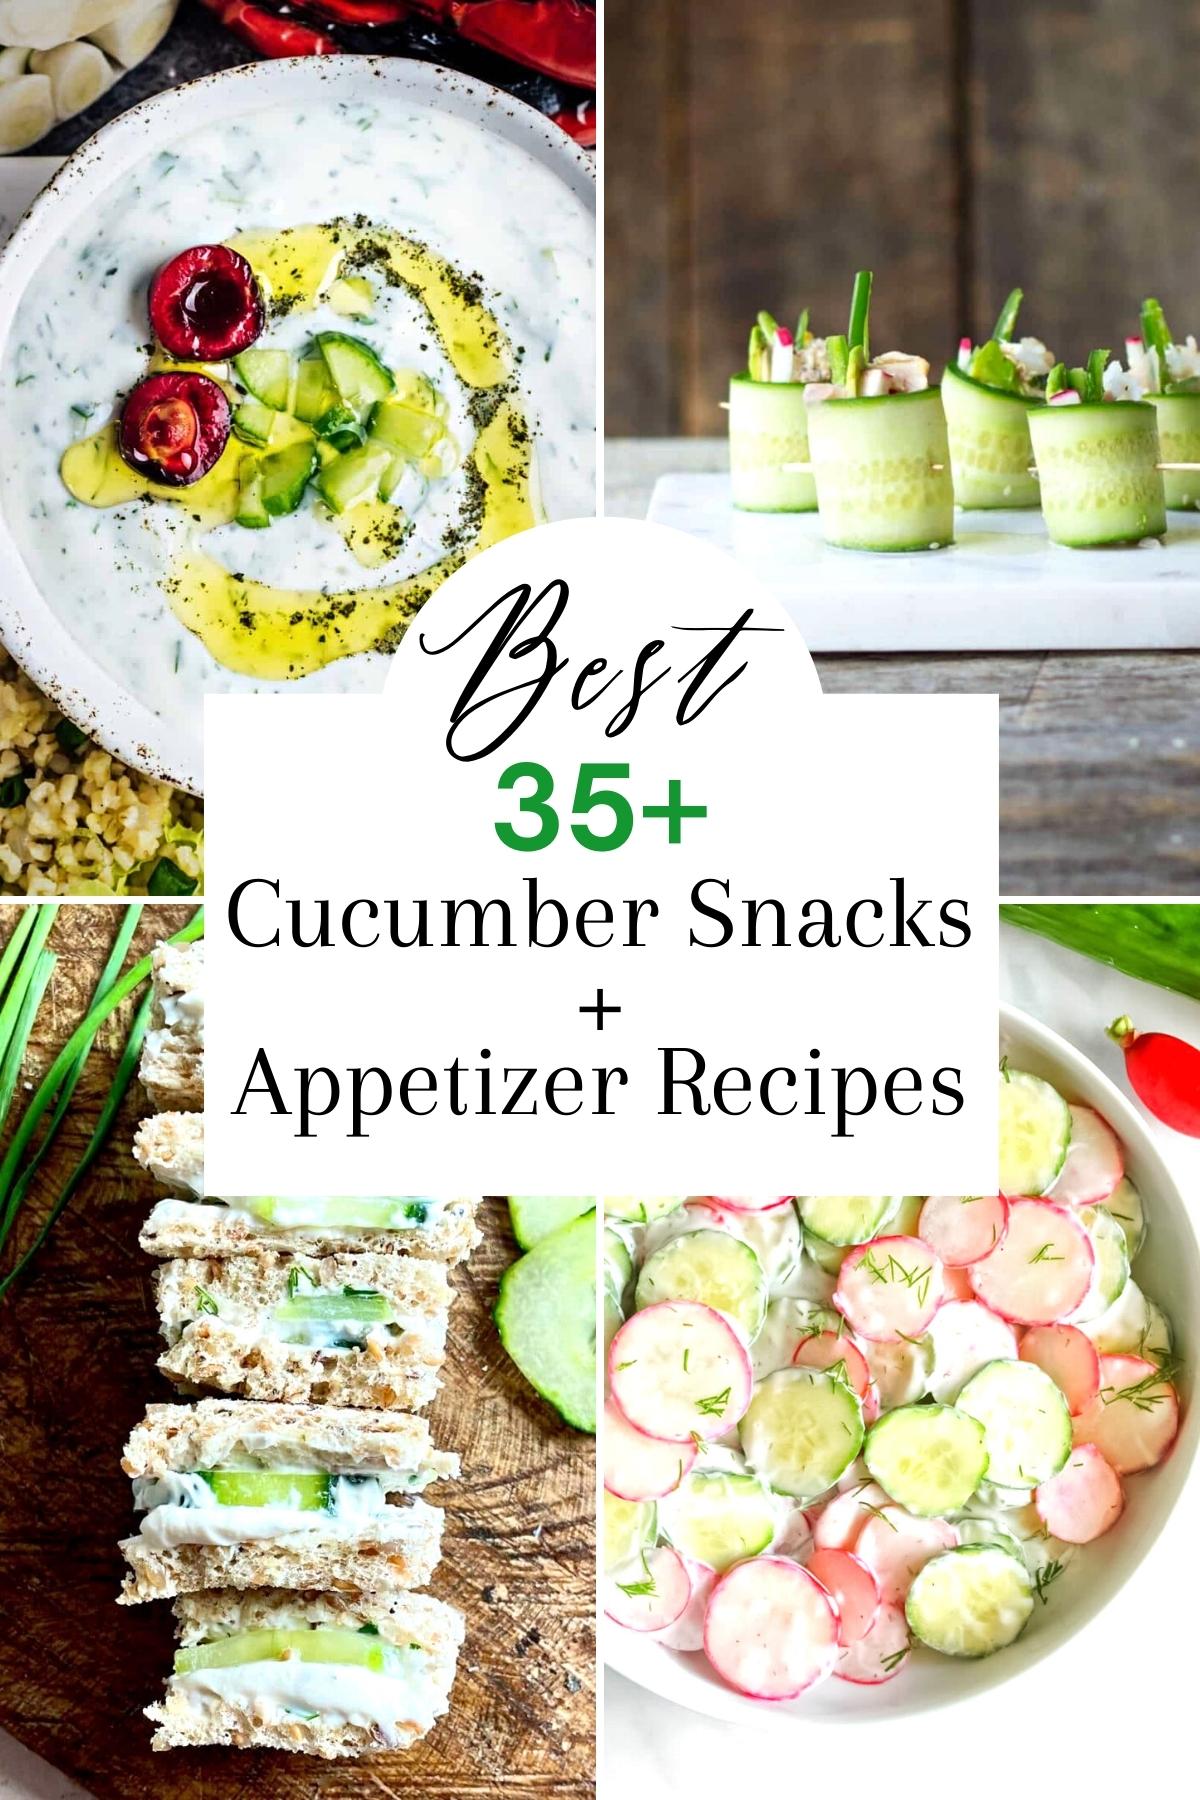 Collage of 4 cucumber recipes with title, "35+ best cucumber snack ideas and appetizers".